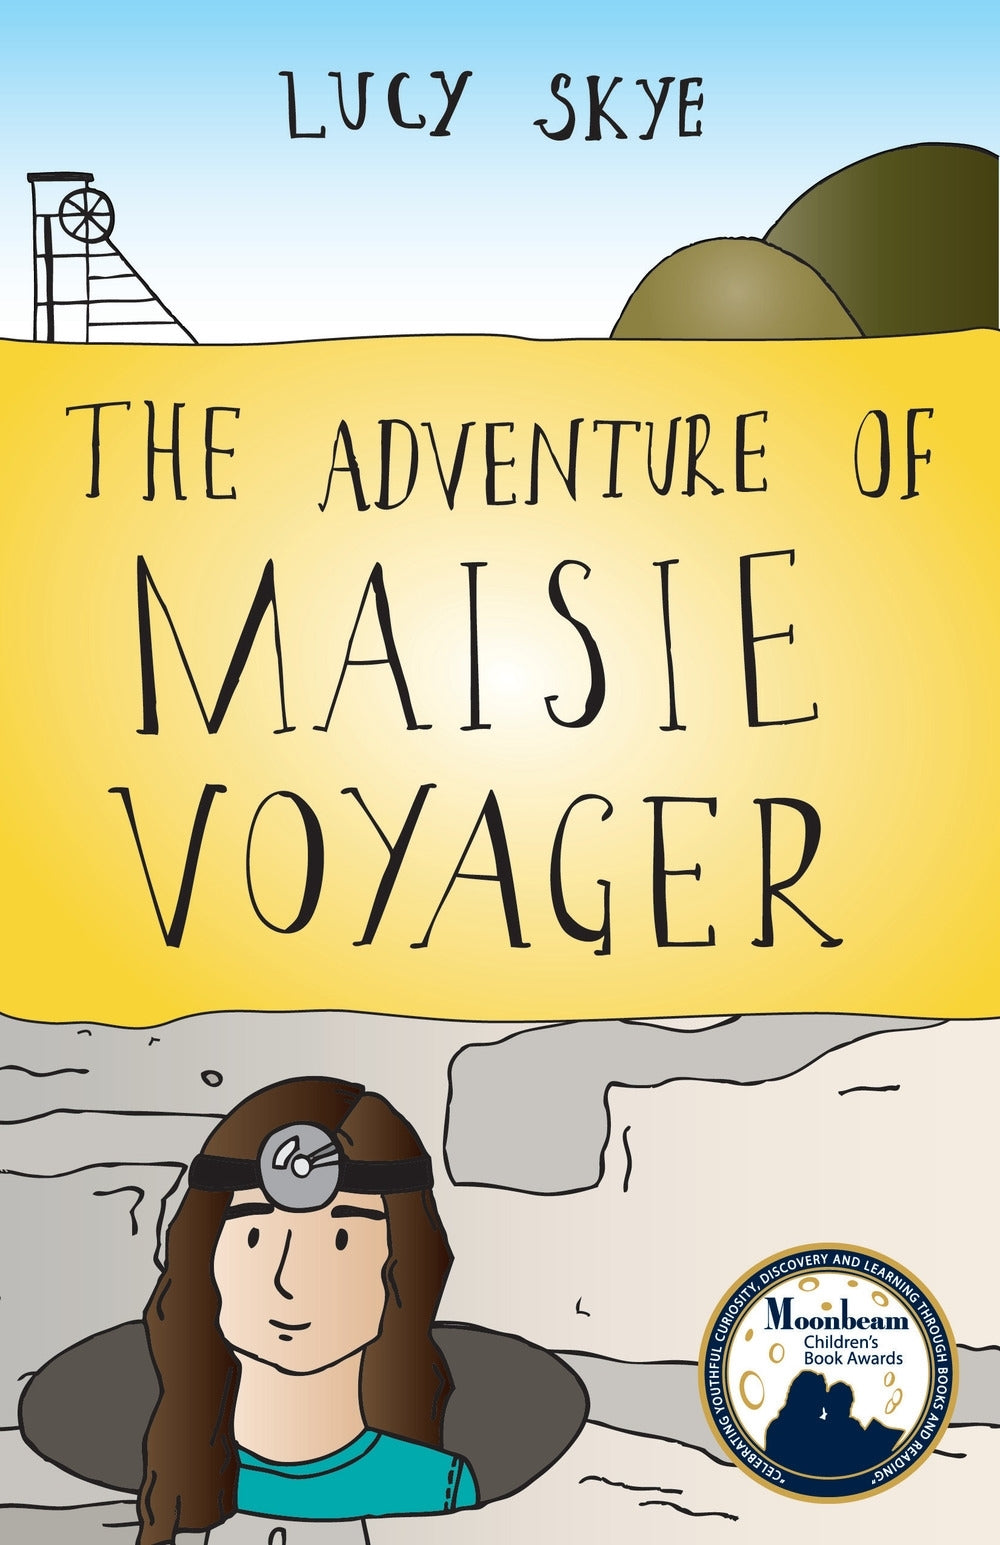 The Adventure of Maisie Voyager by Lucy Skye